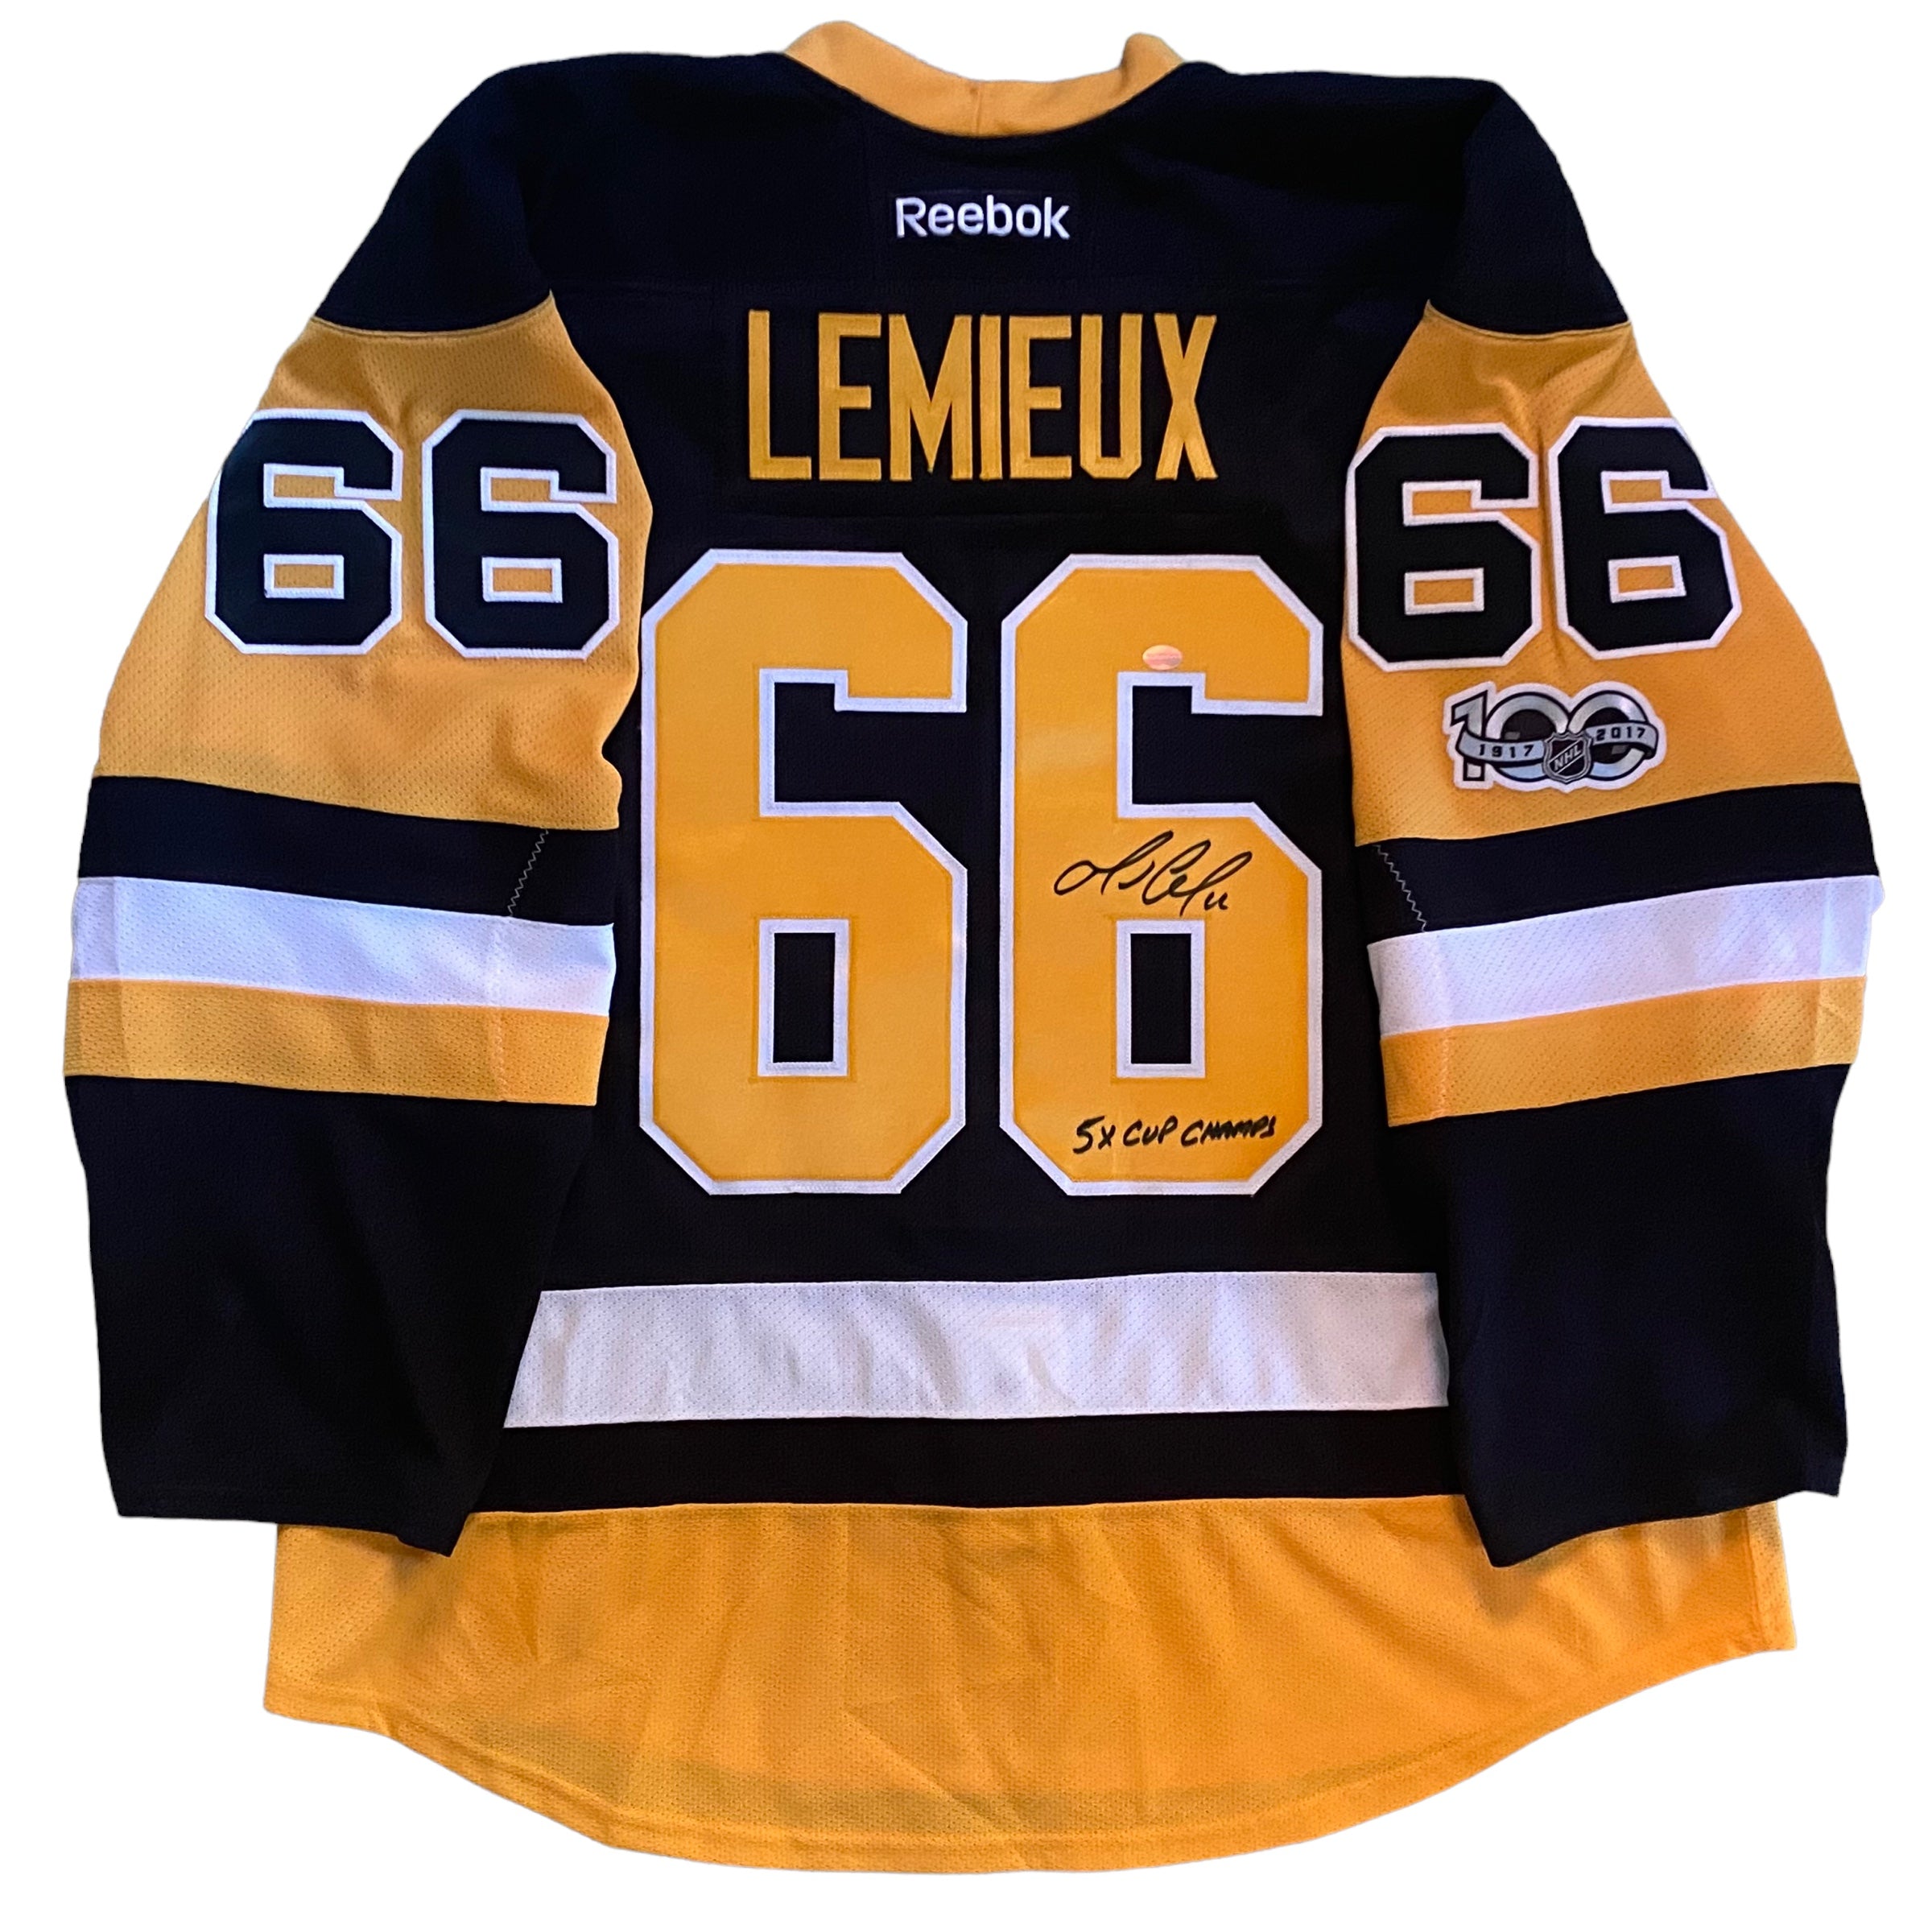 Mario Lemieux Signed, Inscribed Le Magnifique Pittsburgh Penguins  Authentic Koho Jersey - Size 56 - New with Tags